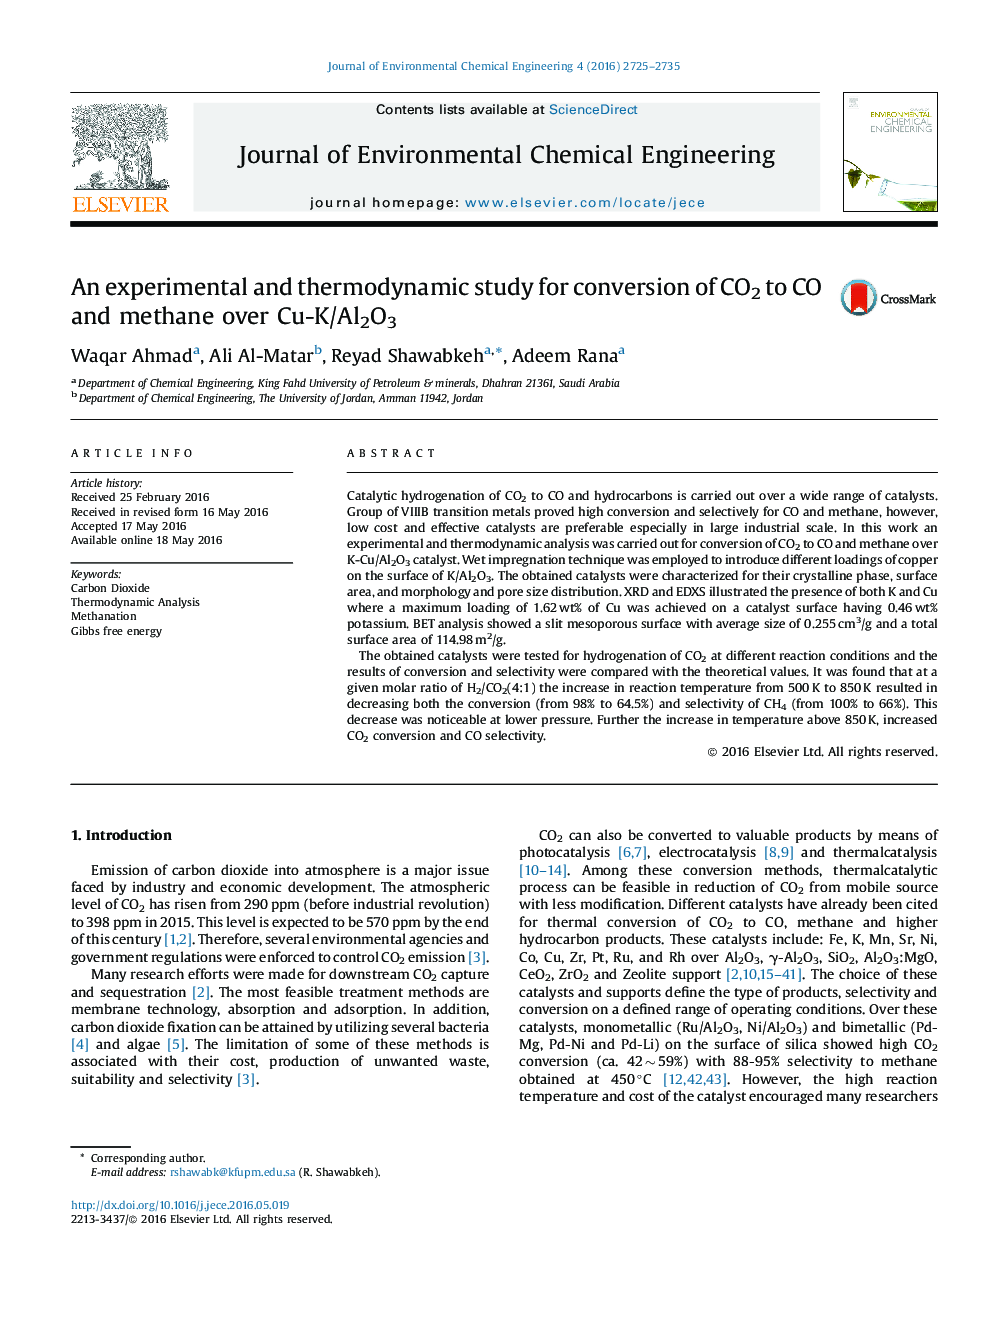 An experimental and thermodynamic study for conversion of CO2 to CO and methane over Cu-K/Al2O3